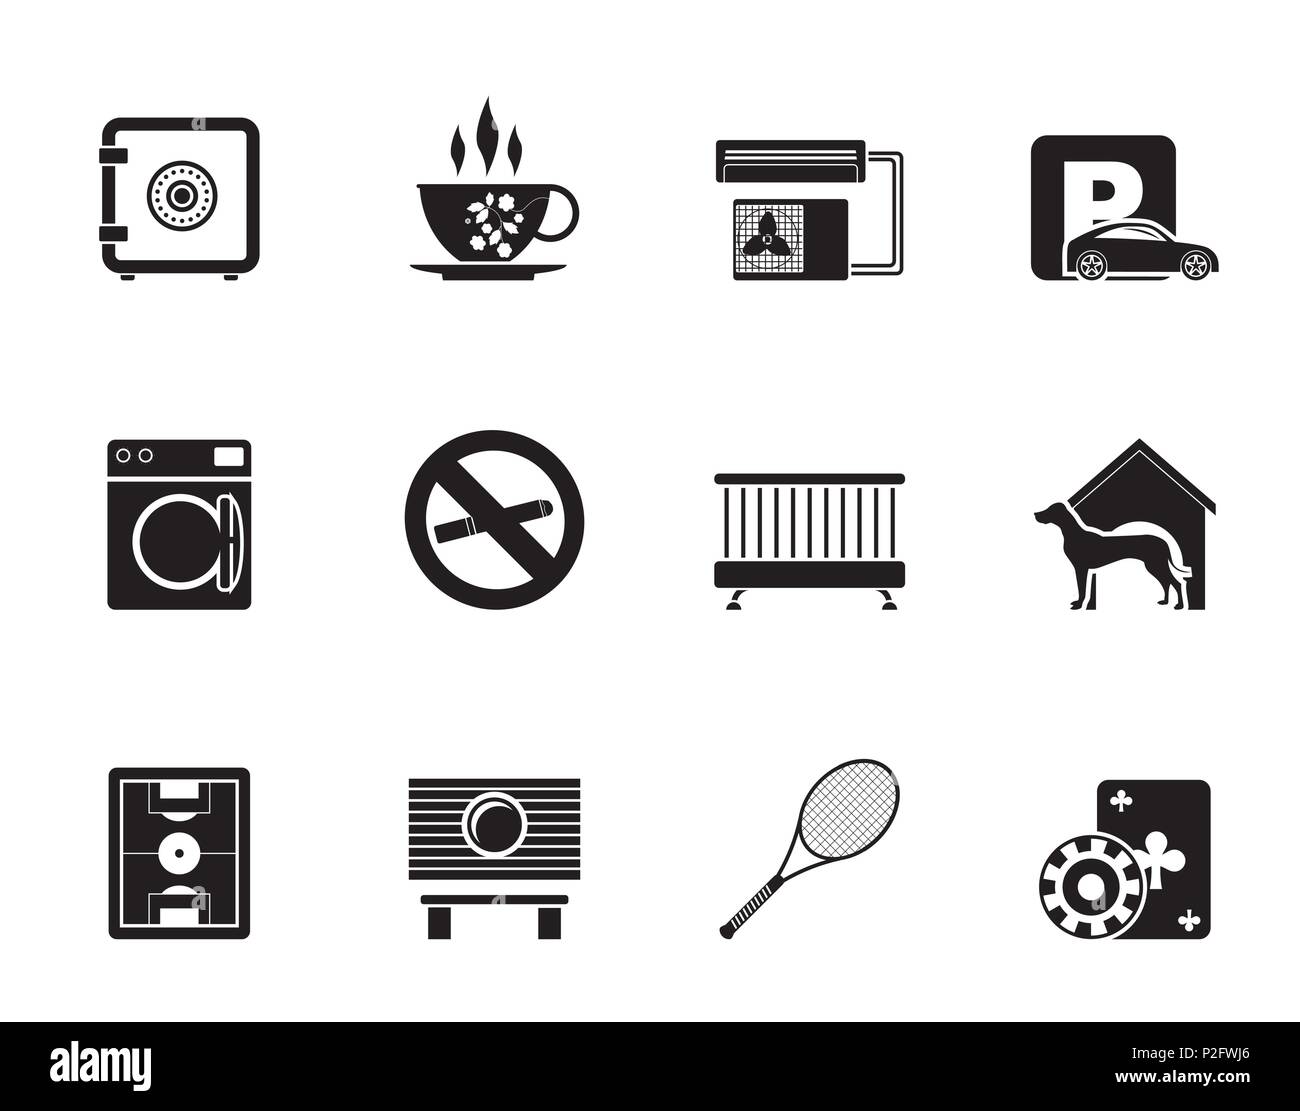 Silhouette hotel and motel amenity icons - vector icon set Stock Vector